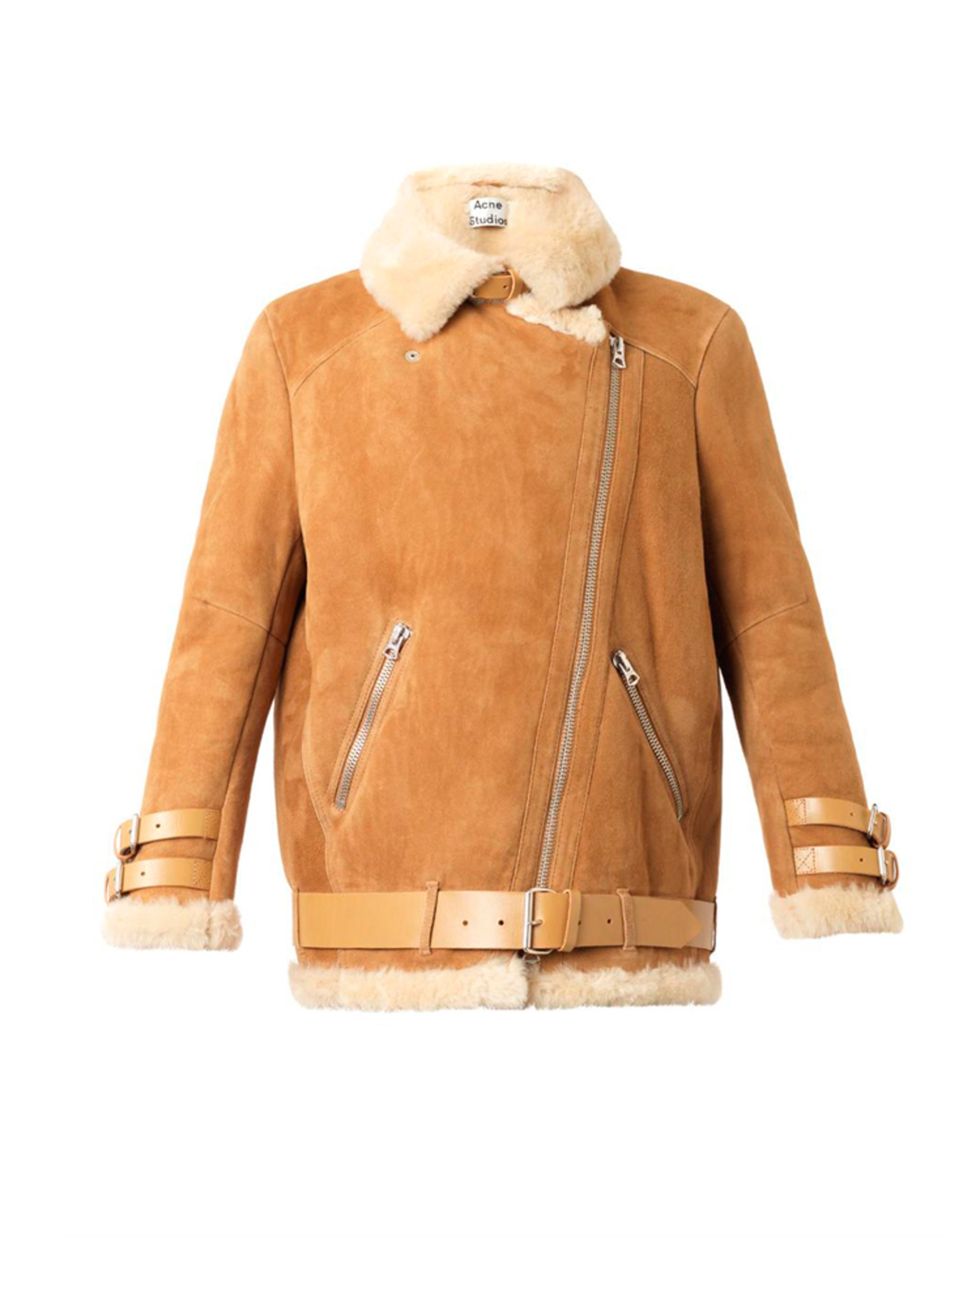 <p>Acne shearling coat, £2,000 from <a href="http://www.matchesfashion.com/product/200253" target="_blank">Matchesfashion.com</a></p>